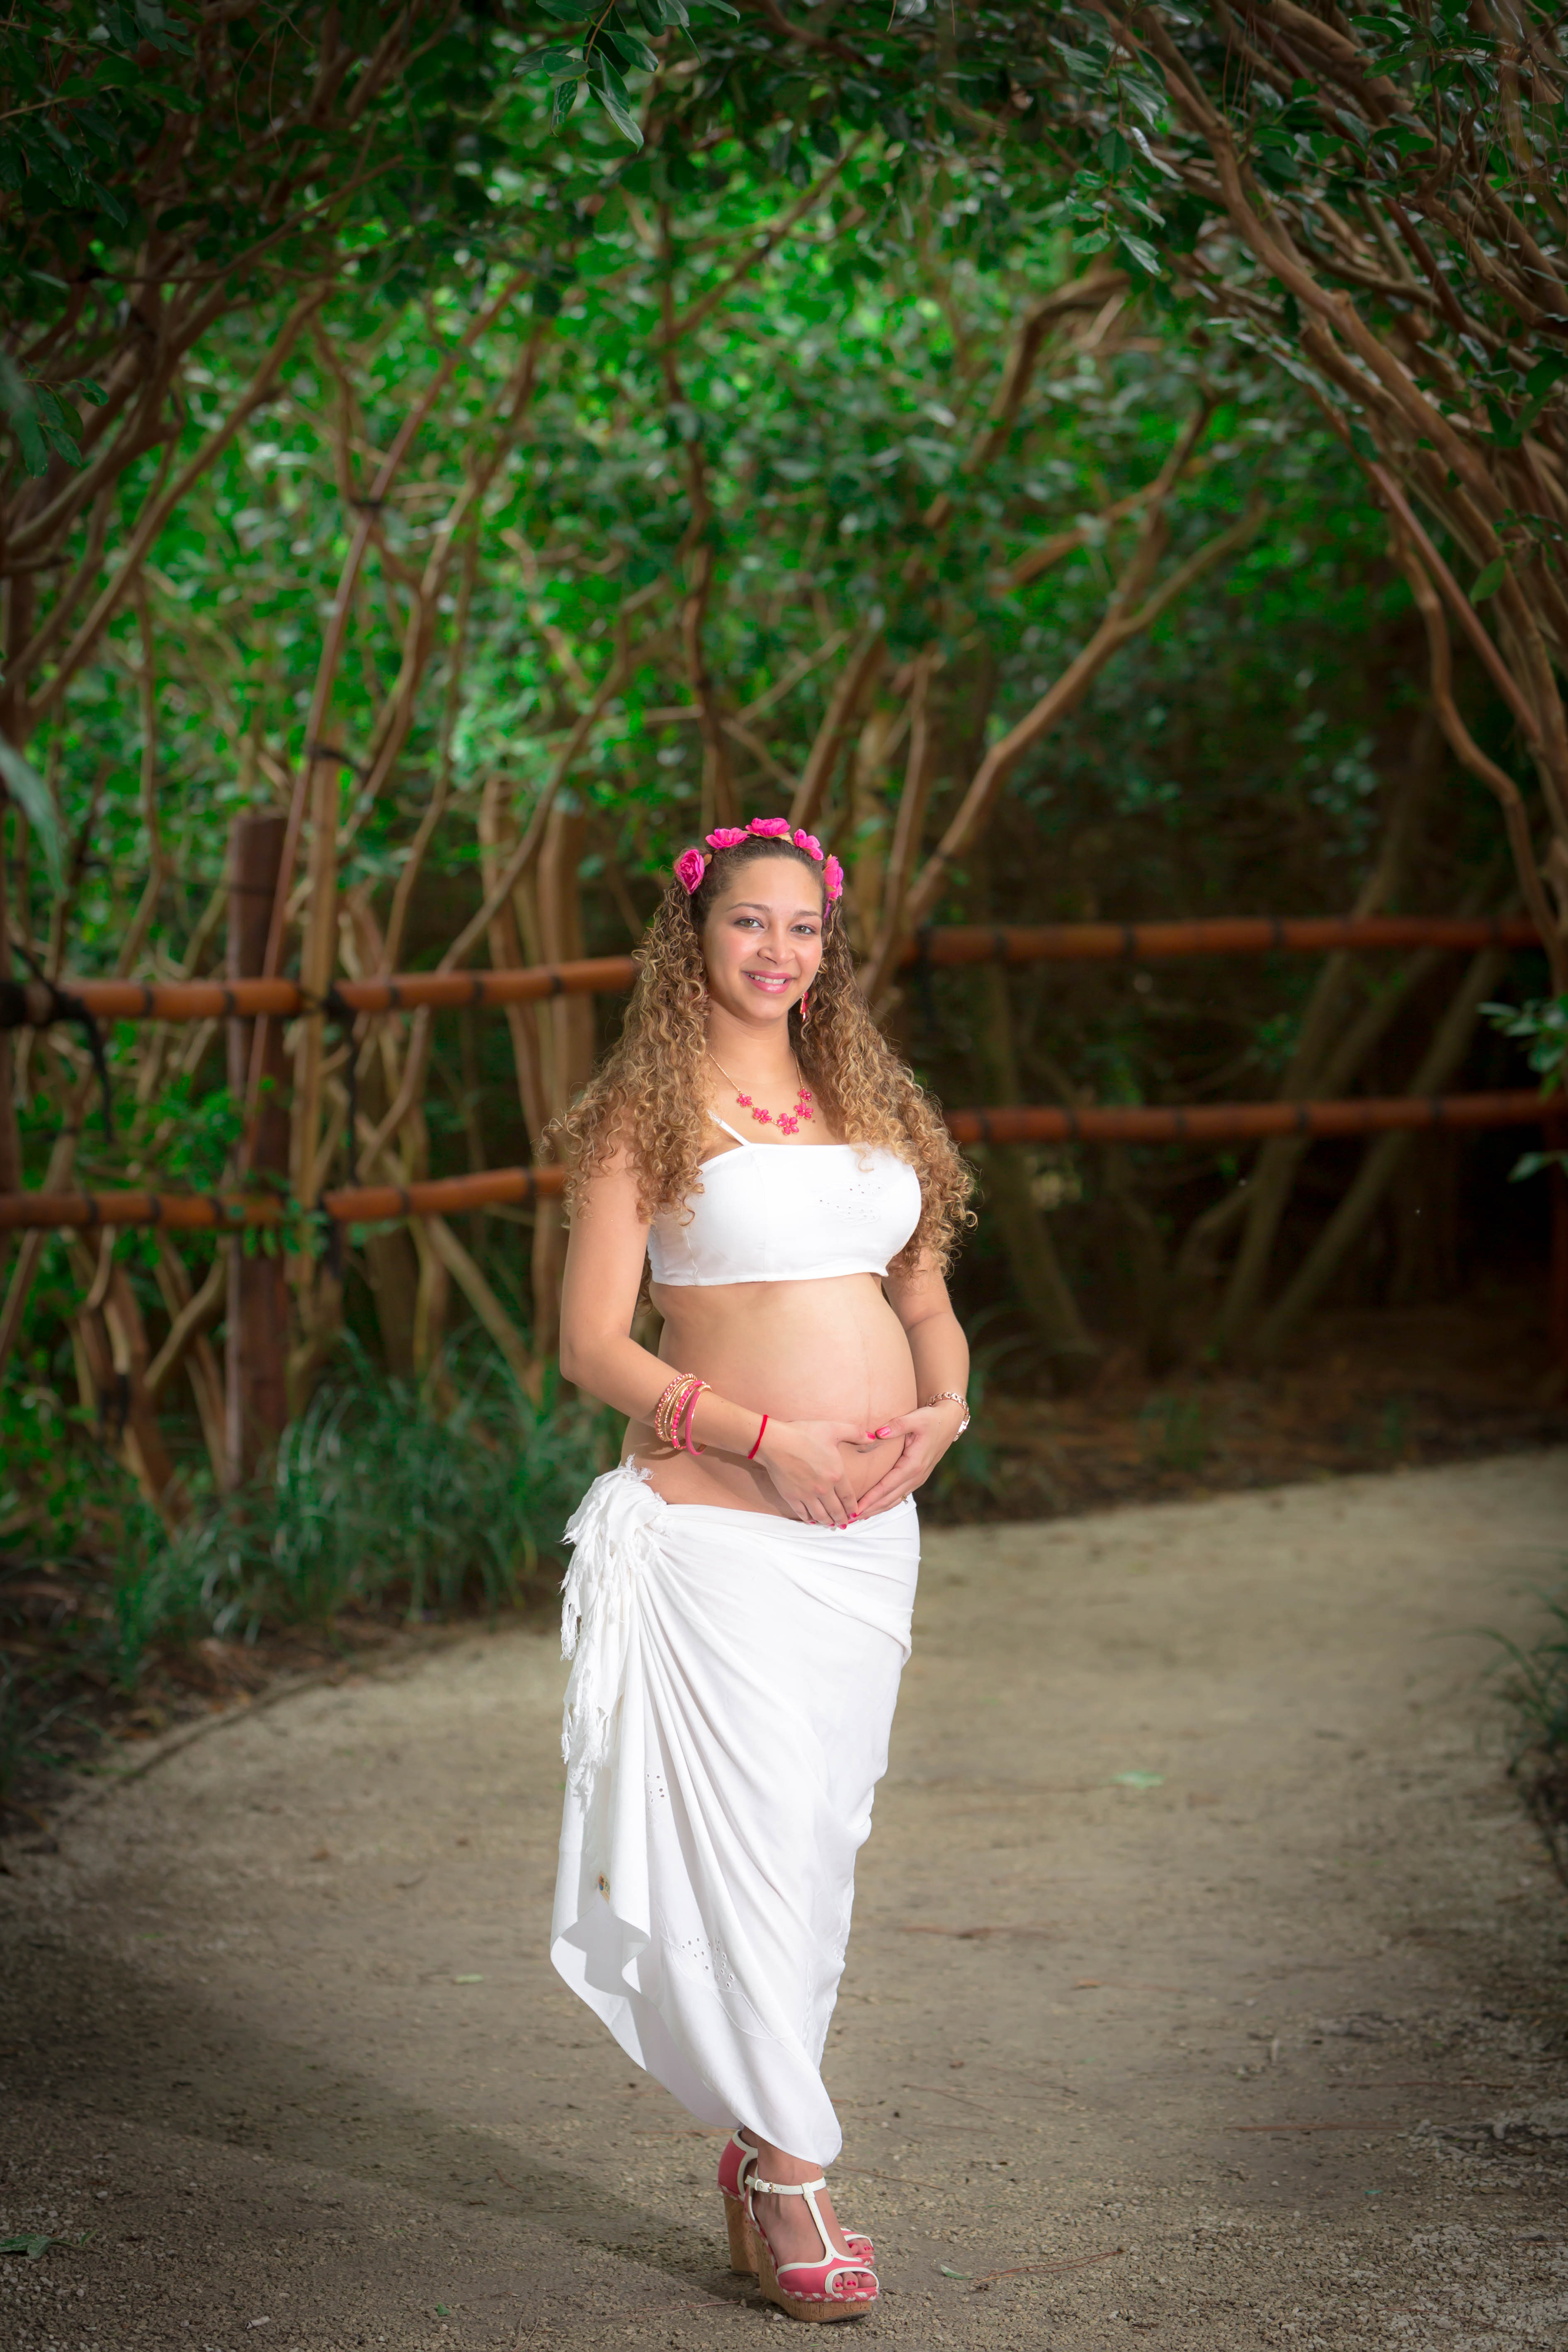 Alfredo Valentine Couture Bridal Photography Maternity Session at Morikami Japanese Gardens in Delray Beach, Florida